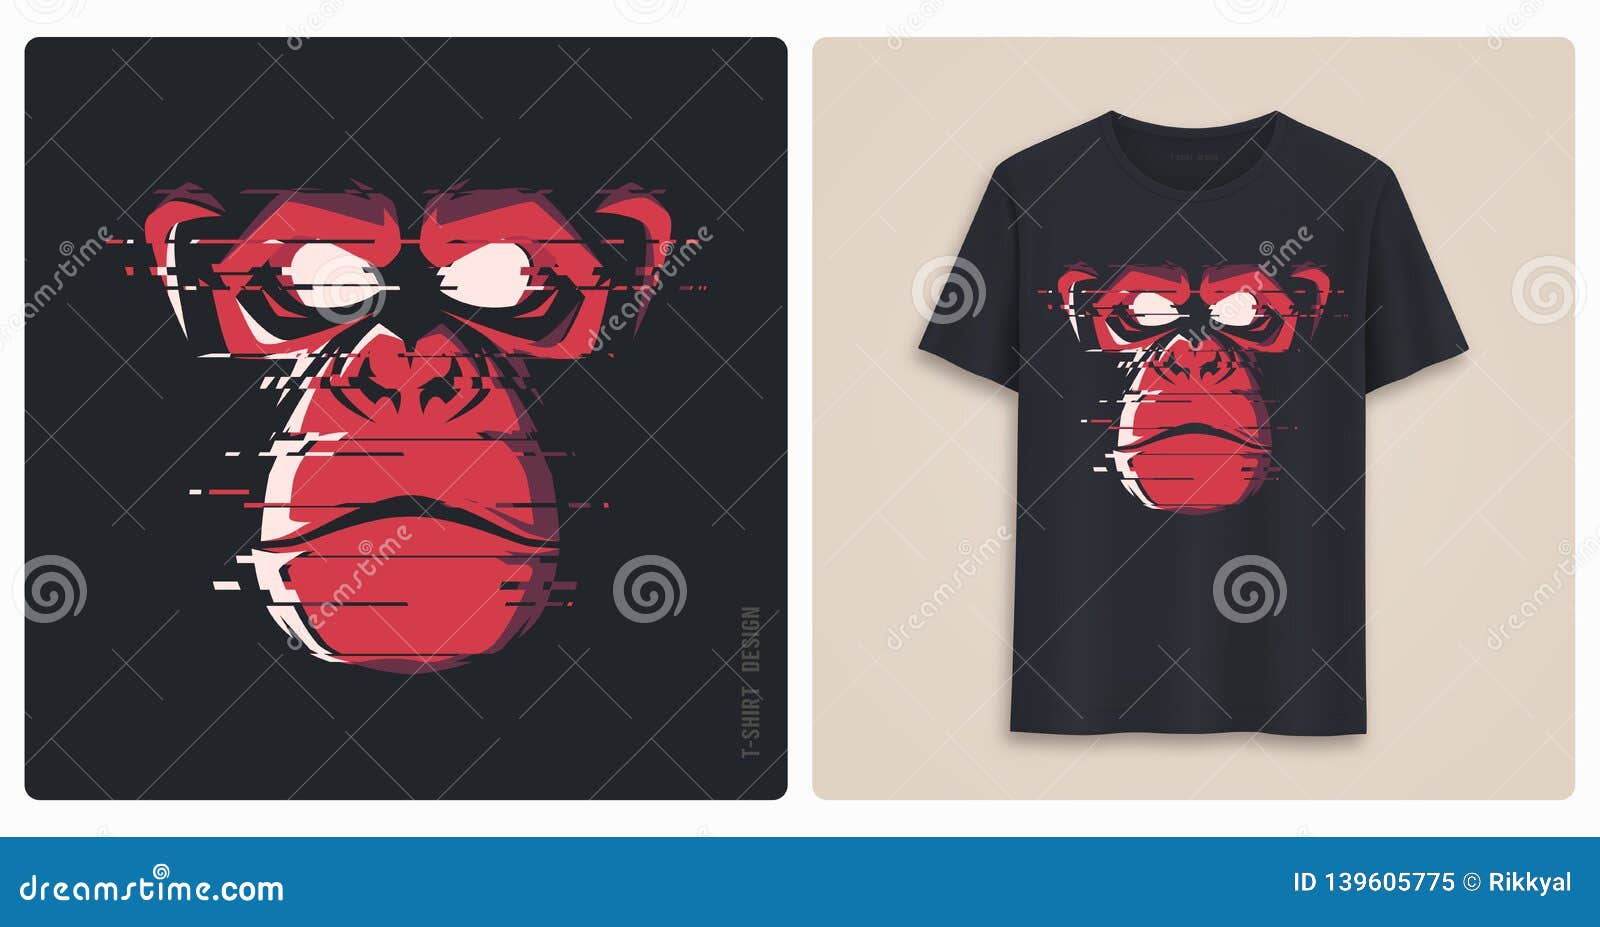 graphic tee shirt , print with glitch styled angry chimp.